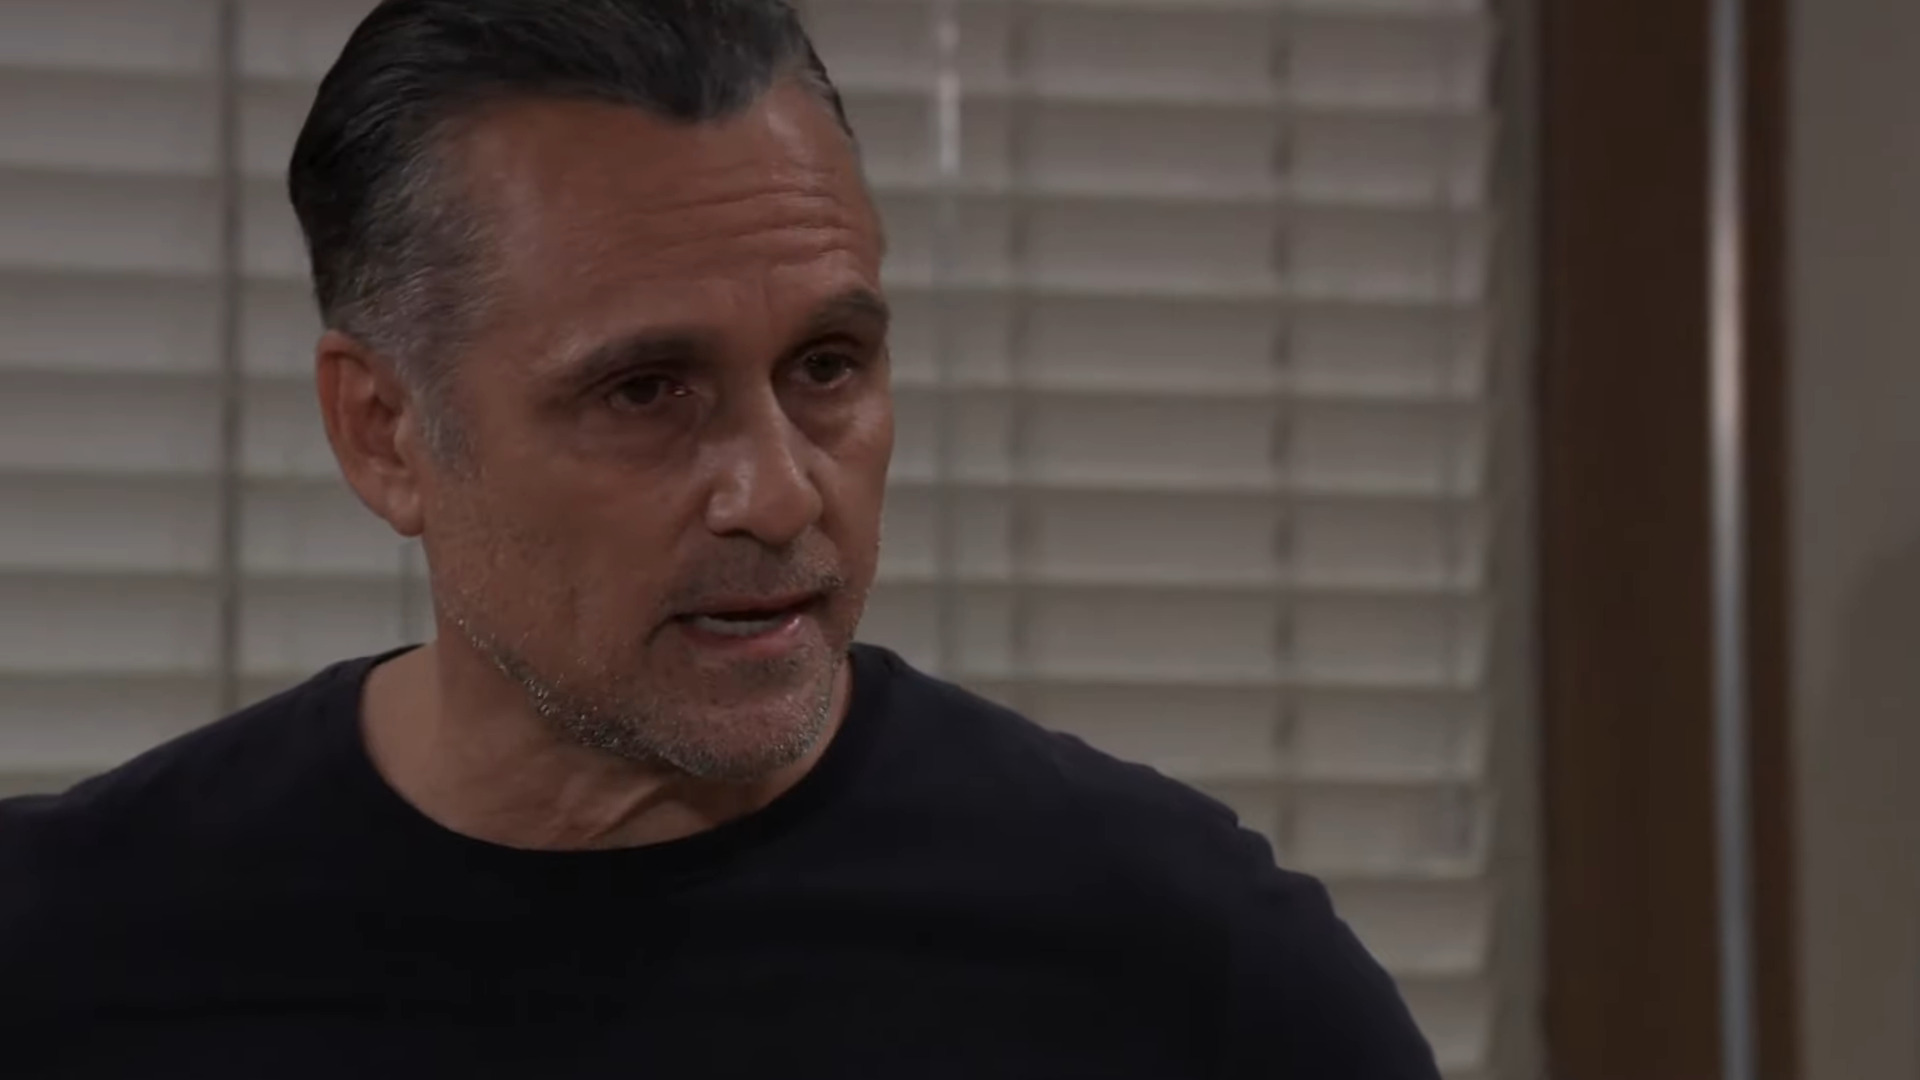 sonny another attack GH